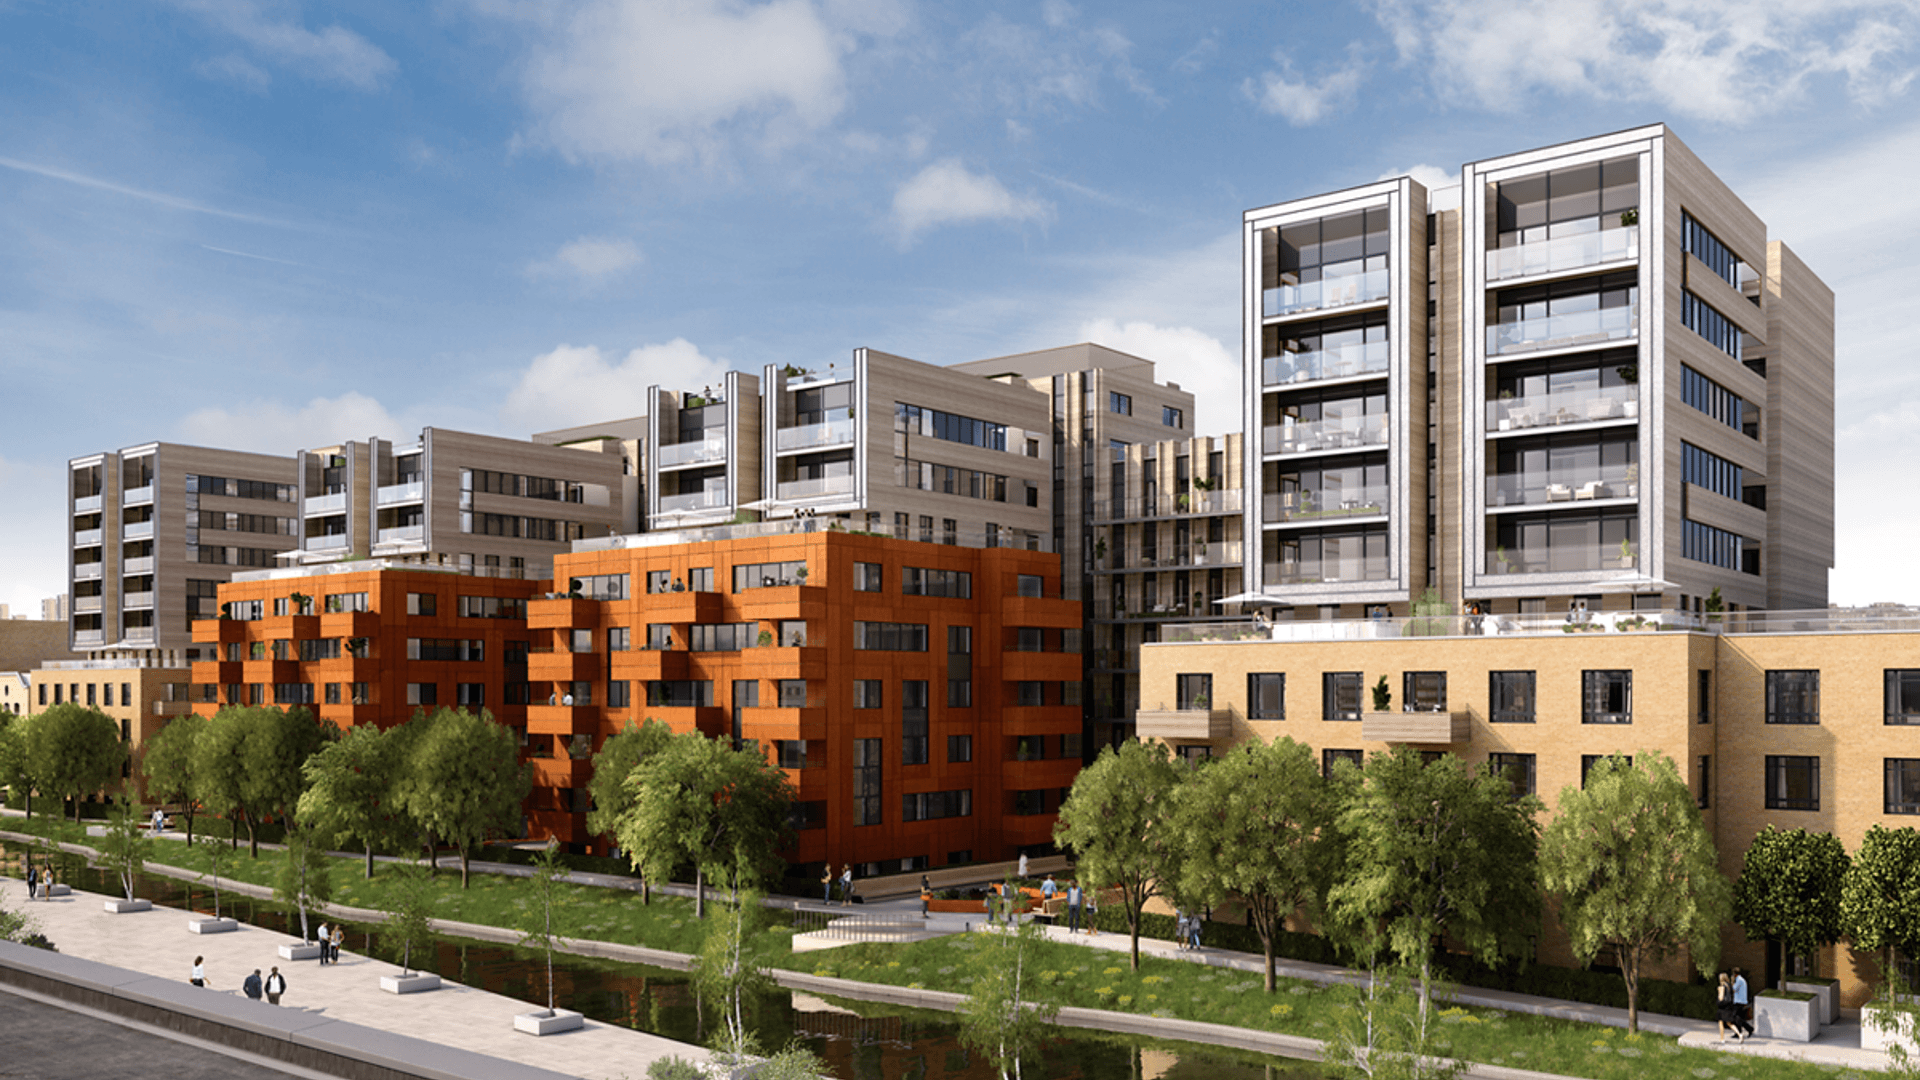 Apartments to Rent by a2dominion at City Wharf, Hackney, N1, development panoramic